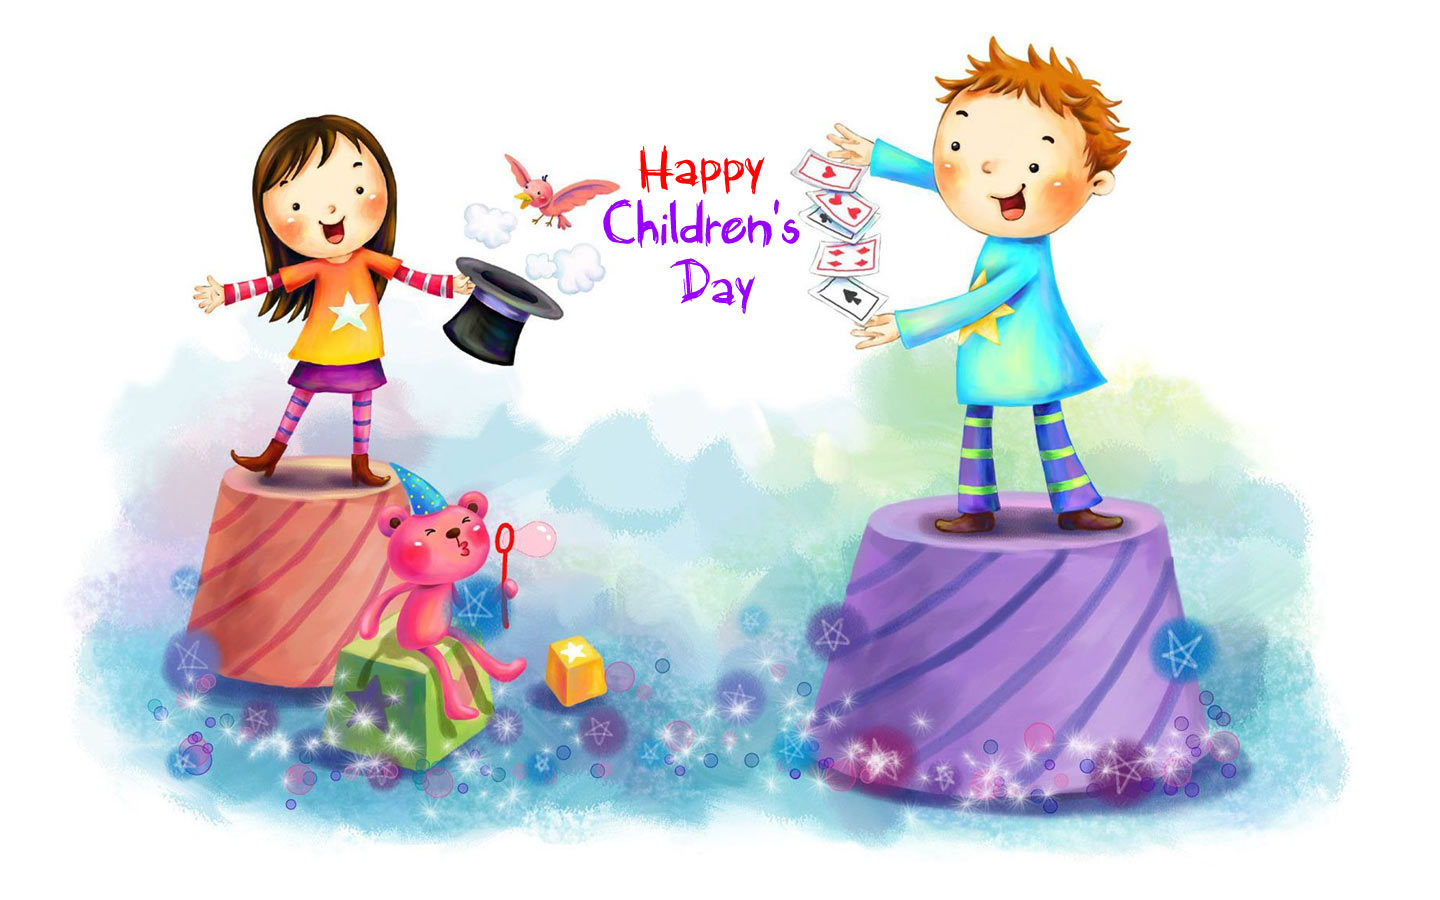 Happy Childrens Day Images, Hd Wallpapers, And Photos - Children's Day Hd -  1440x900 Wallpaper 